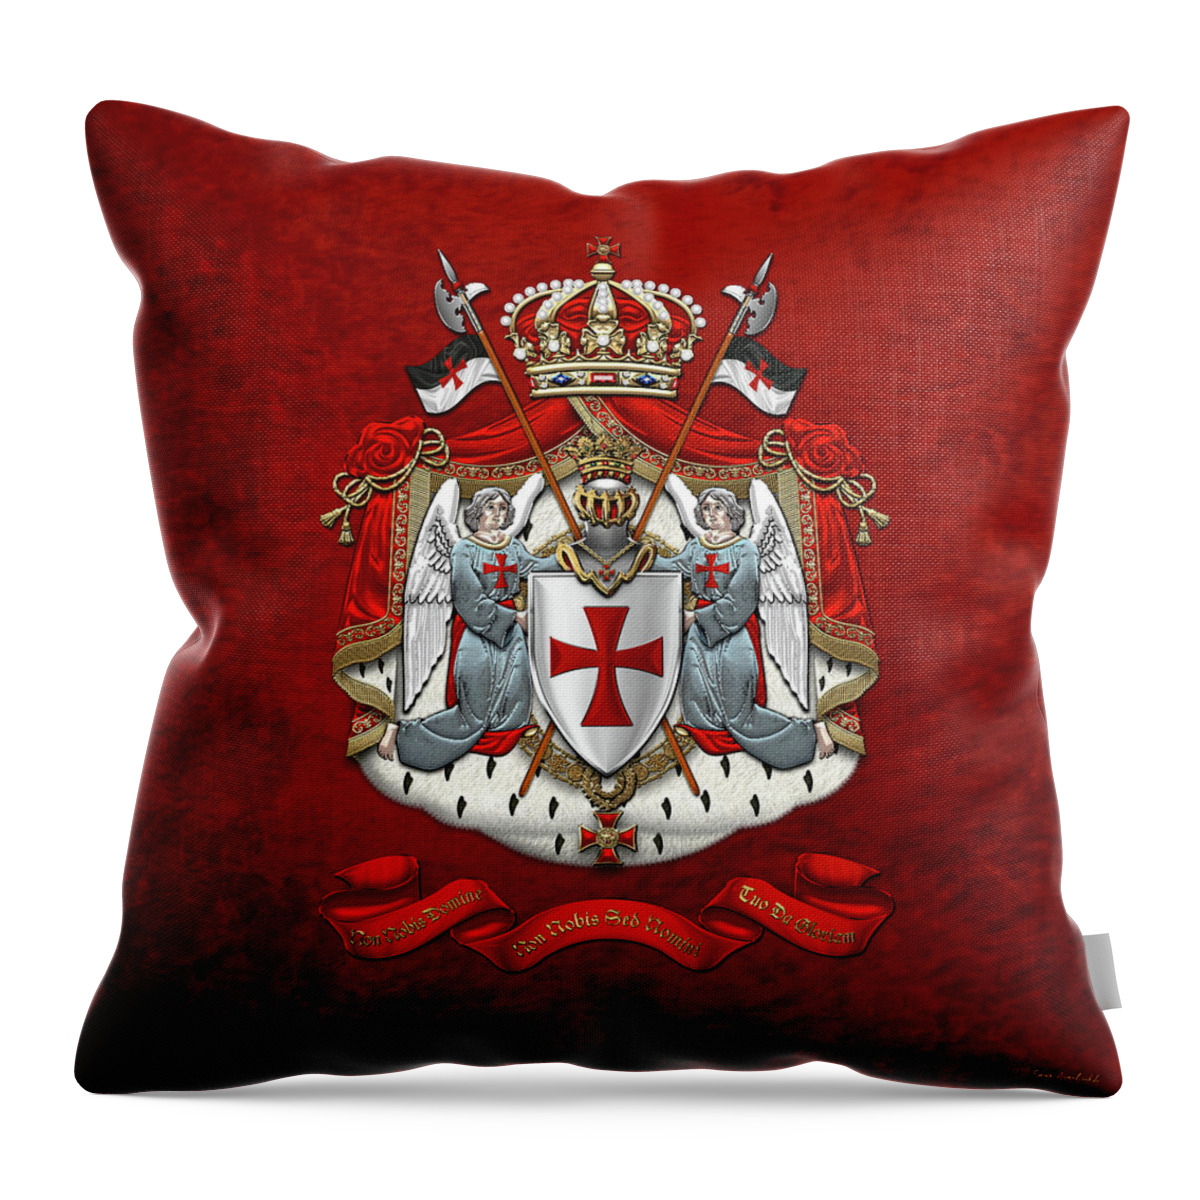 'ancient Brotherhoods' Collection By Serge Averbukh Throw Pillow featuring the digital art Knights Templar - Coat of Arms over Red Velvet by Serge Averbukh